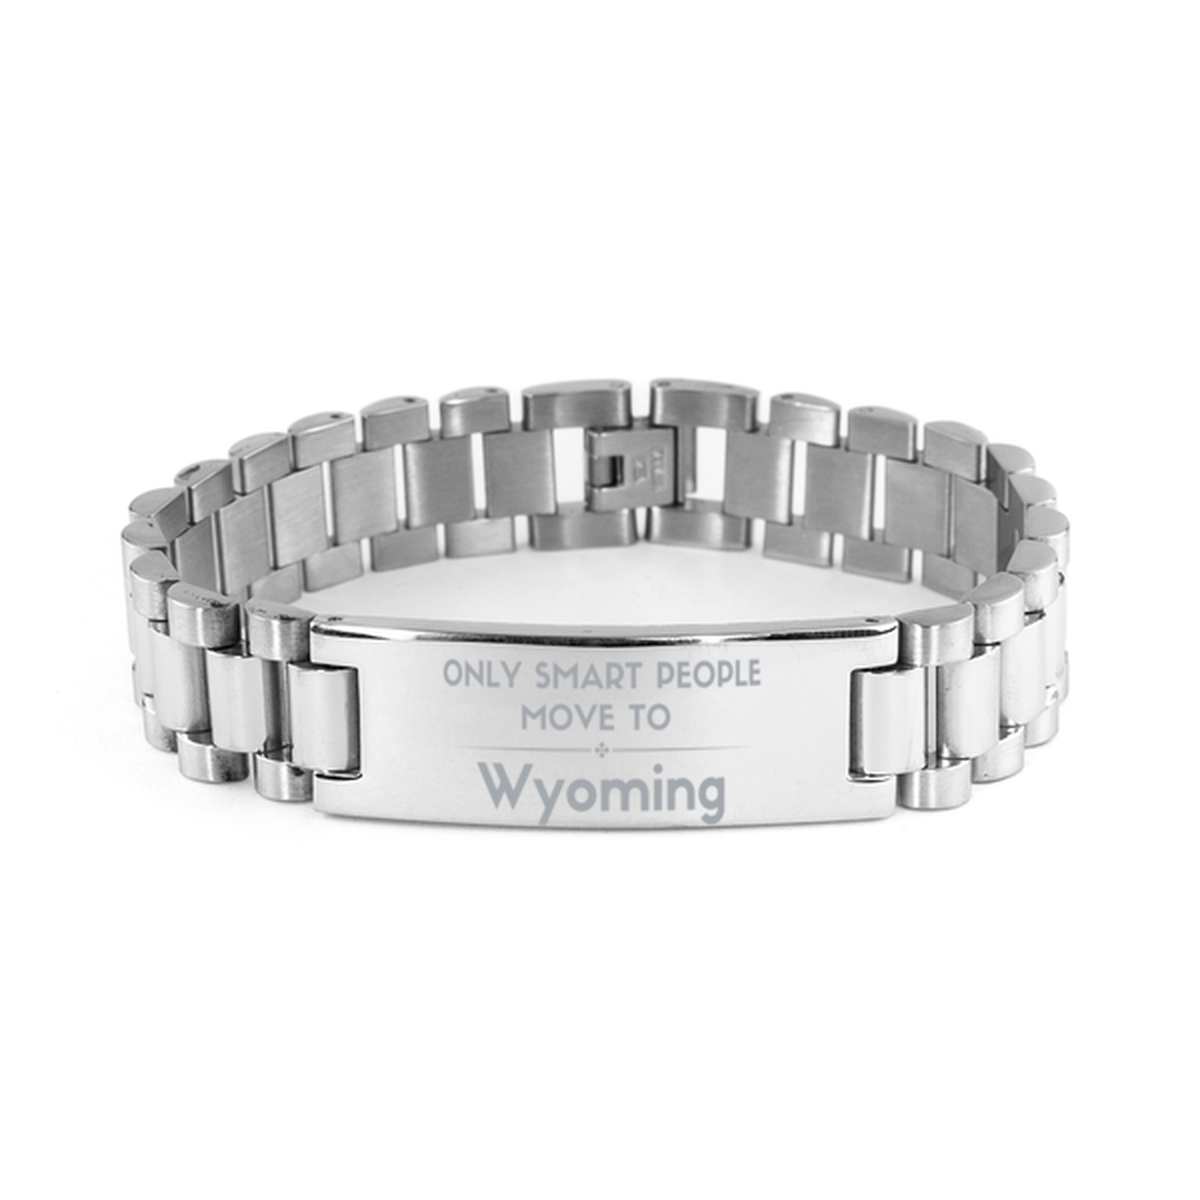 Only smart people move to Wyoming Ladder Stainless Steel Bracelet, Gag Gifts For Wyoming, Move to Wyoming Gifts for Friends Coworker Funny Saying Quote